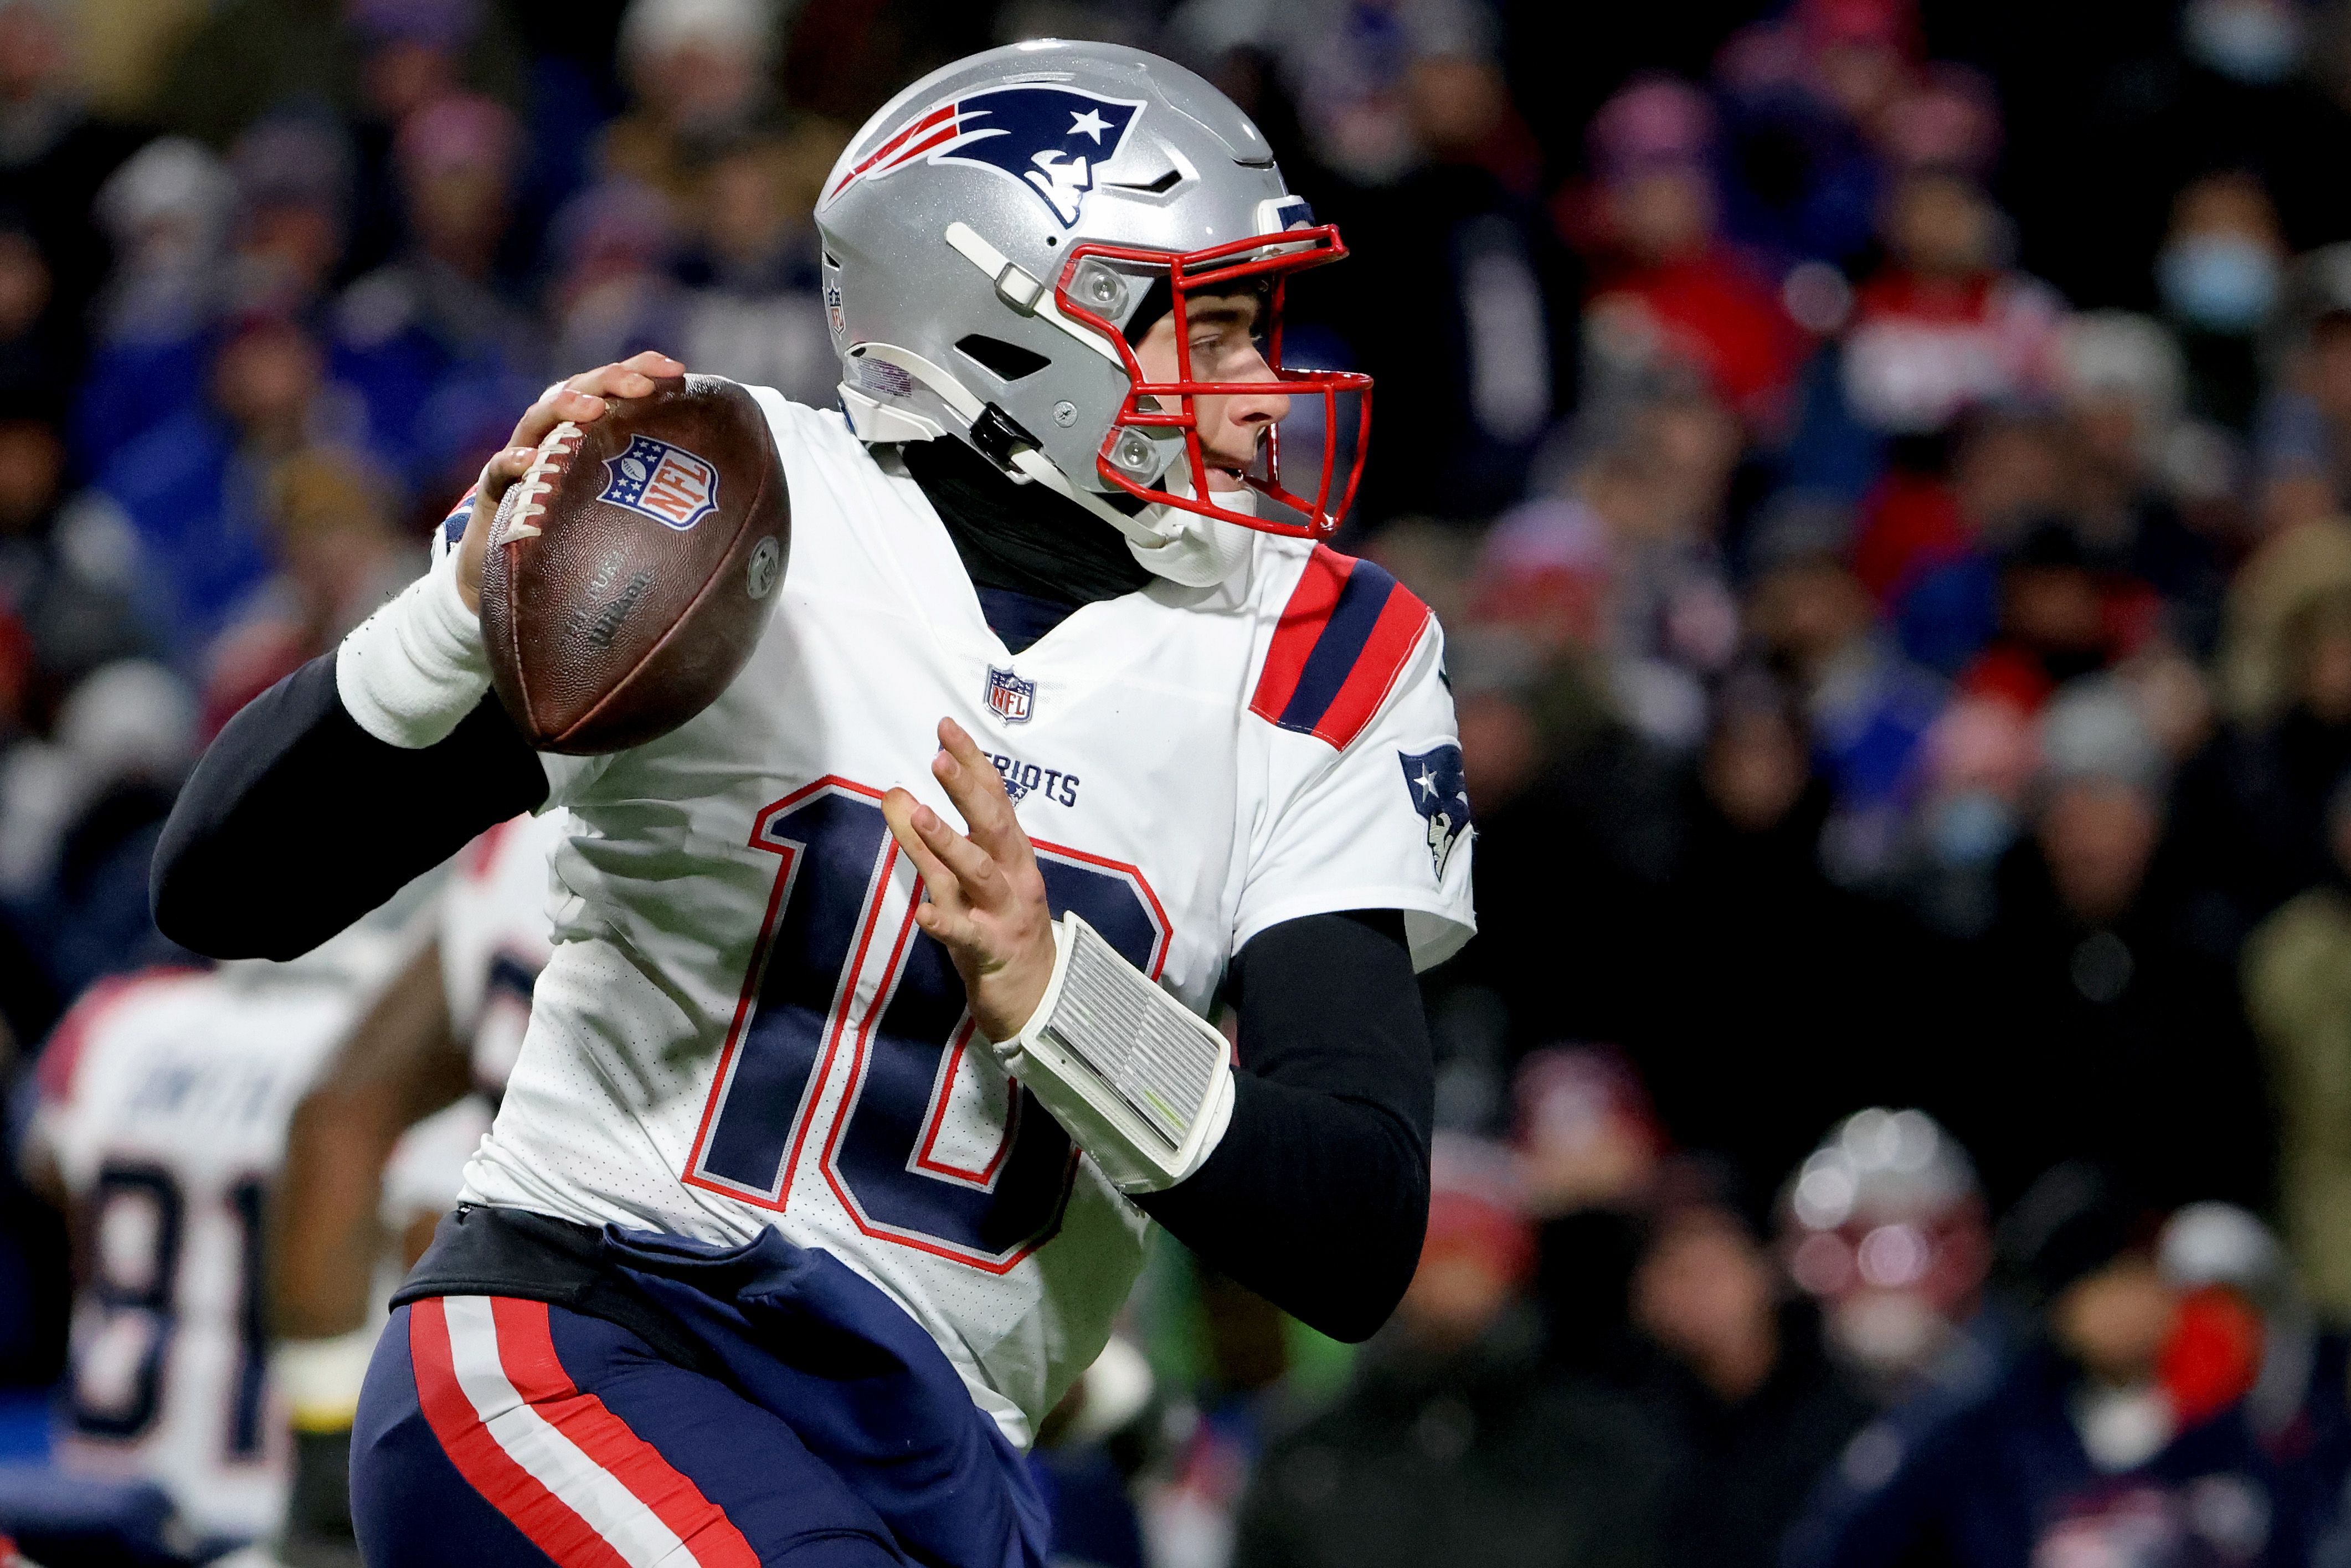 Monday Night Football: Patriots edge Bills in 'crazy game' to win